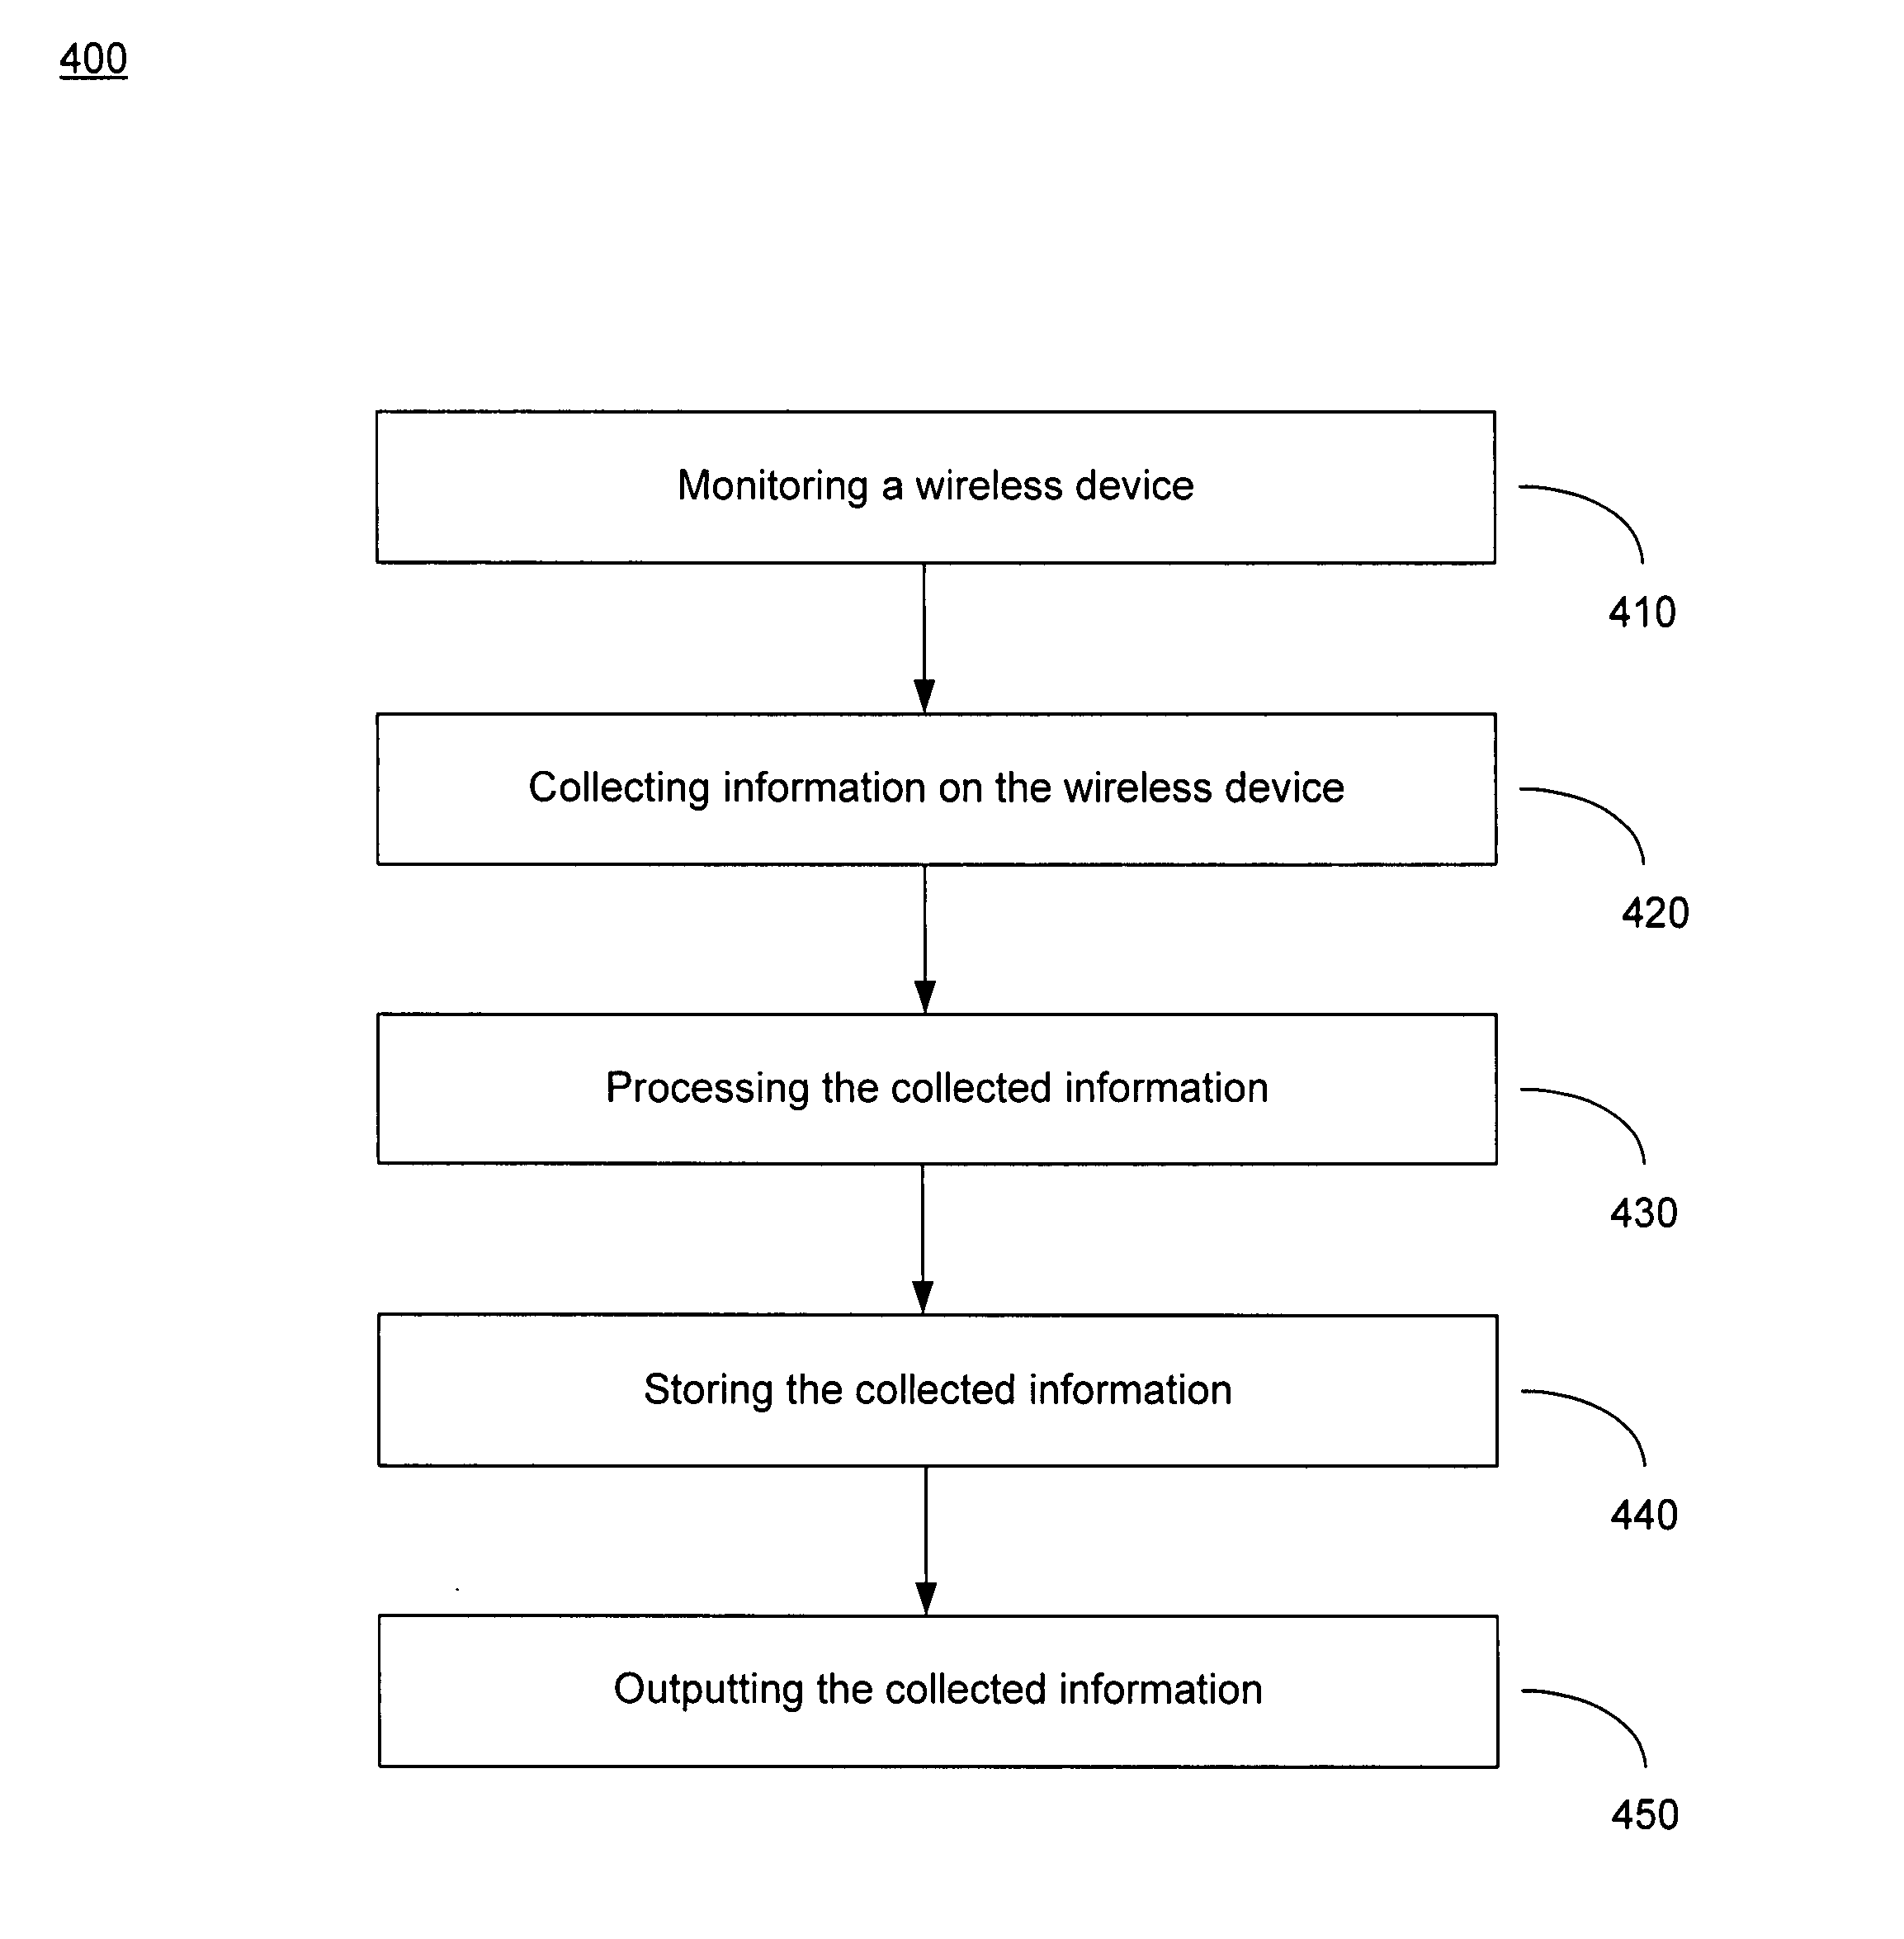 Method and system for collecting wireless information transparently and non-intrusively